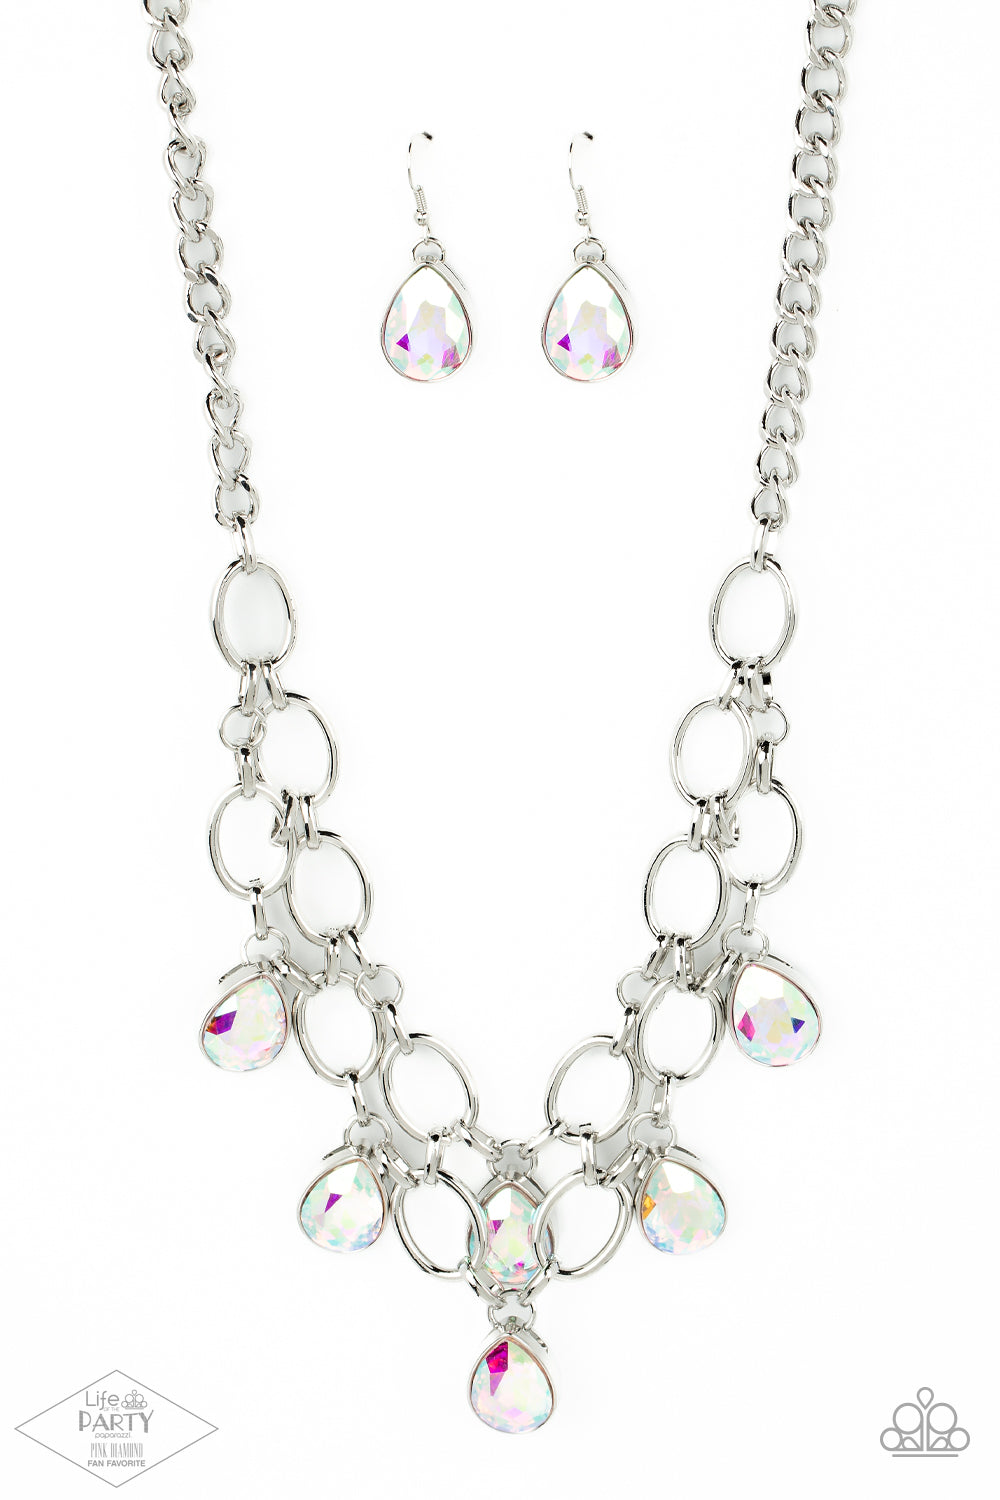 Paparazzi Show-Stopping Shimmer - Iridescent Necklaces joined by dainty silver links, two rows of dramatic silver chain layer below the collar in a fierce fashion. Iridescent teardrop gems drip from the glistening layers, adding a timeless shimmer to the show-stopping piece. Features an adjustable clasp closure.  Sold as one individual necklace. Includes one pair of matching earrings.  Life of the Party Exclusive 